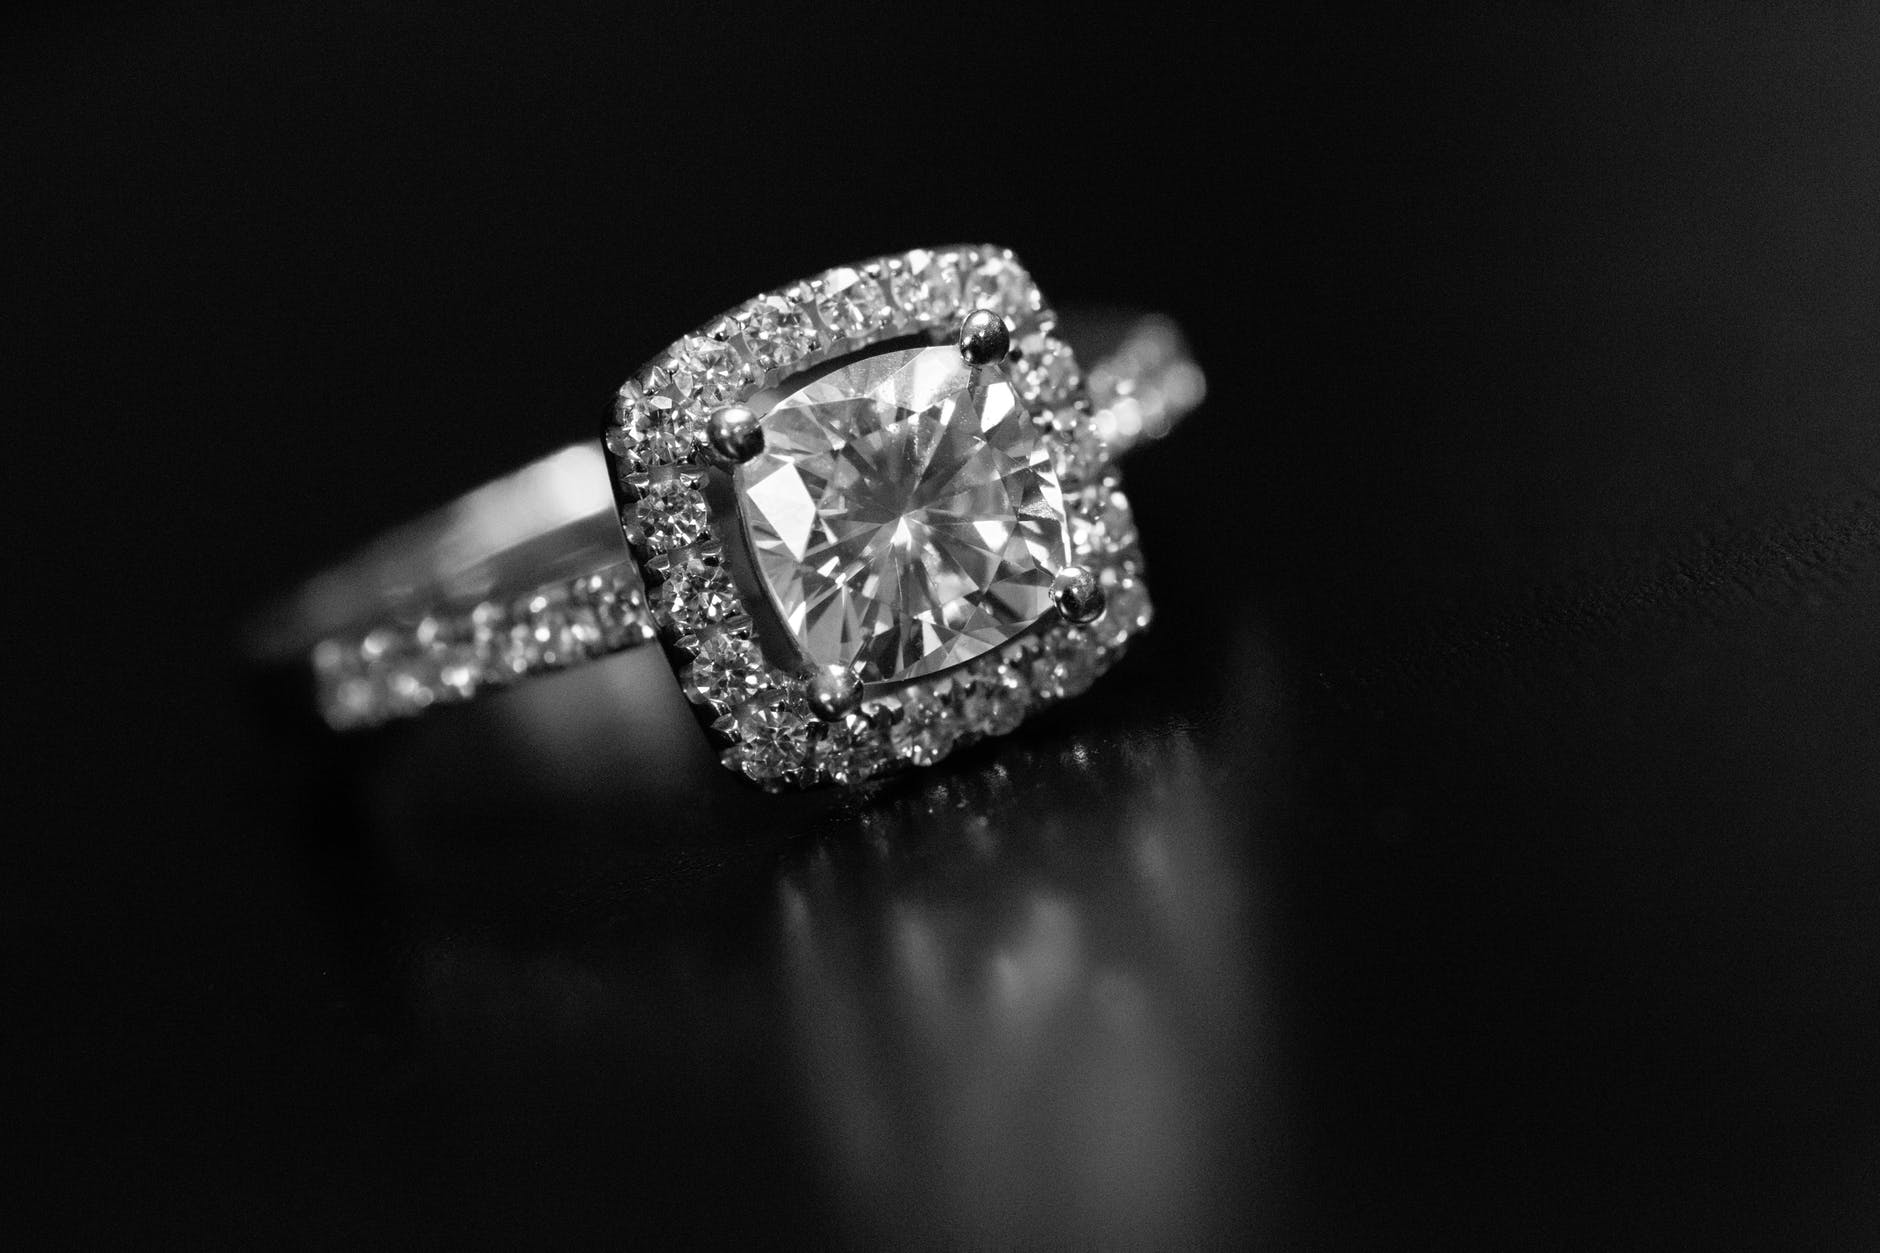 A cushion cut engagement ring studded with stones